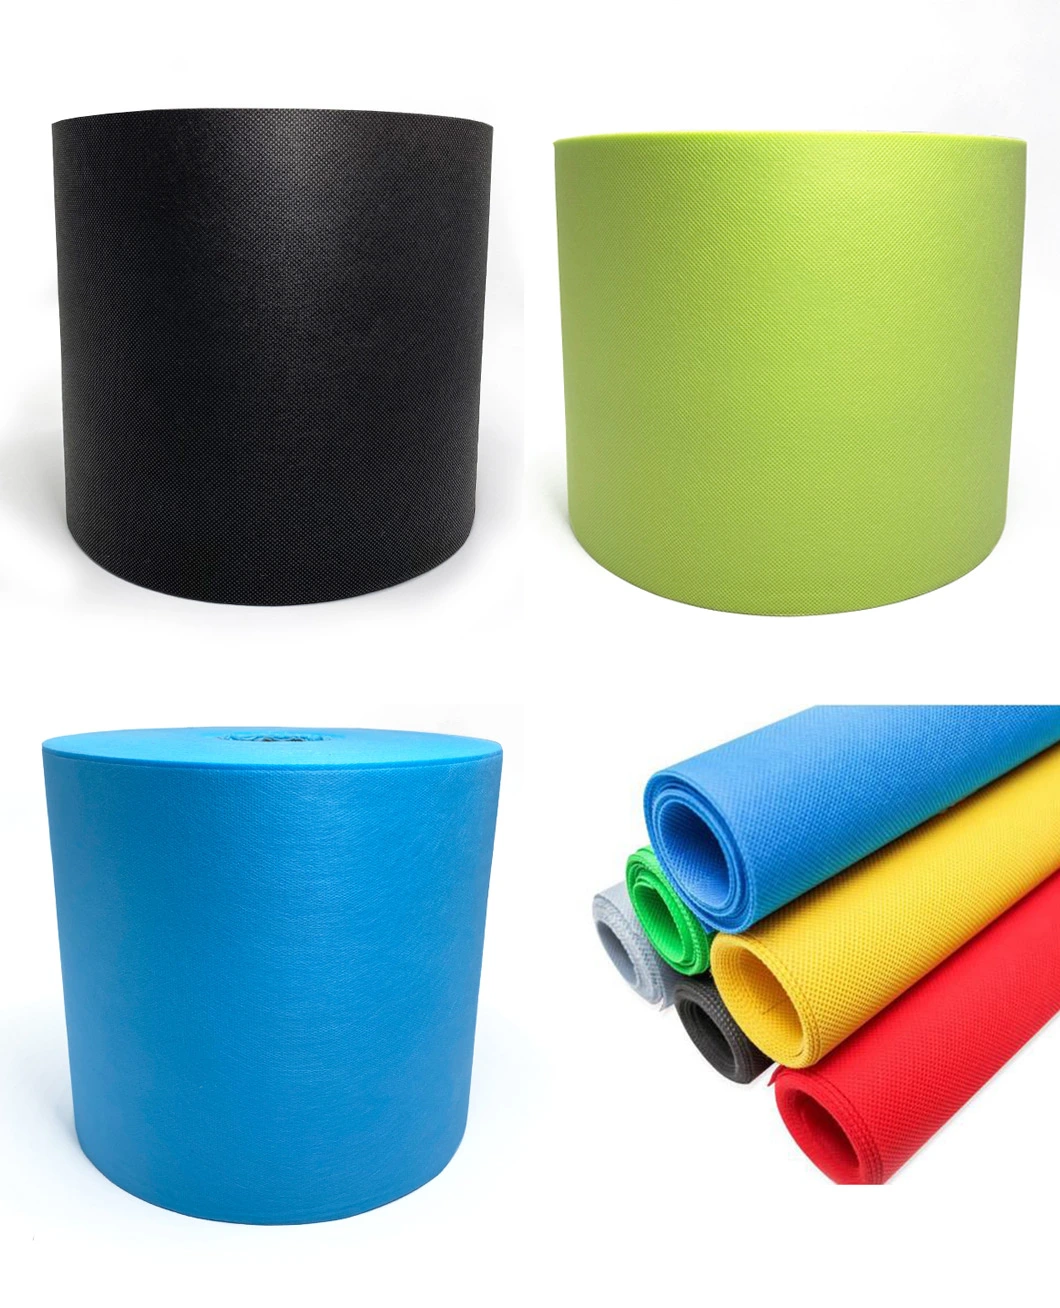 Manufacturing Recyclable Cheap Price Wholesale PP Non Woven Tissue Bag Fabric